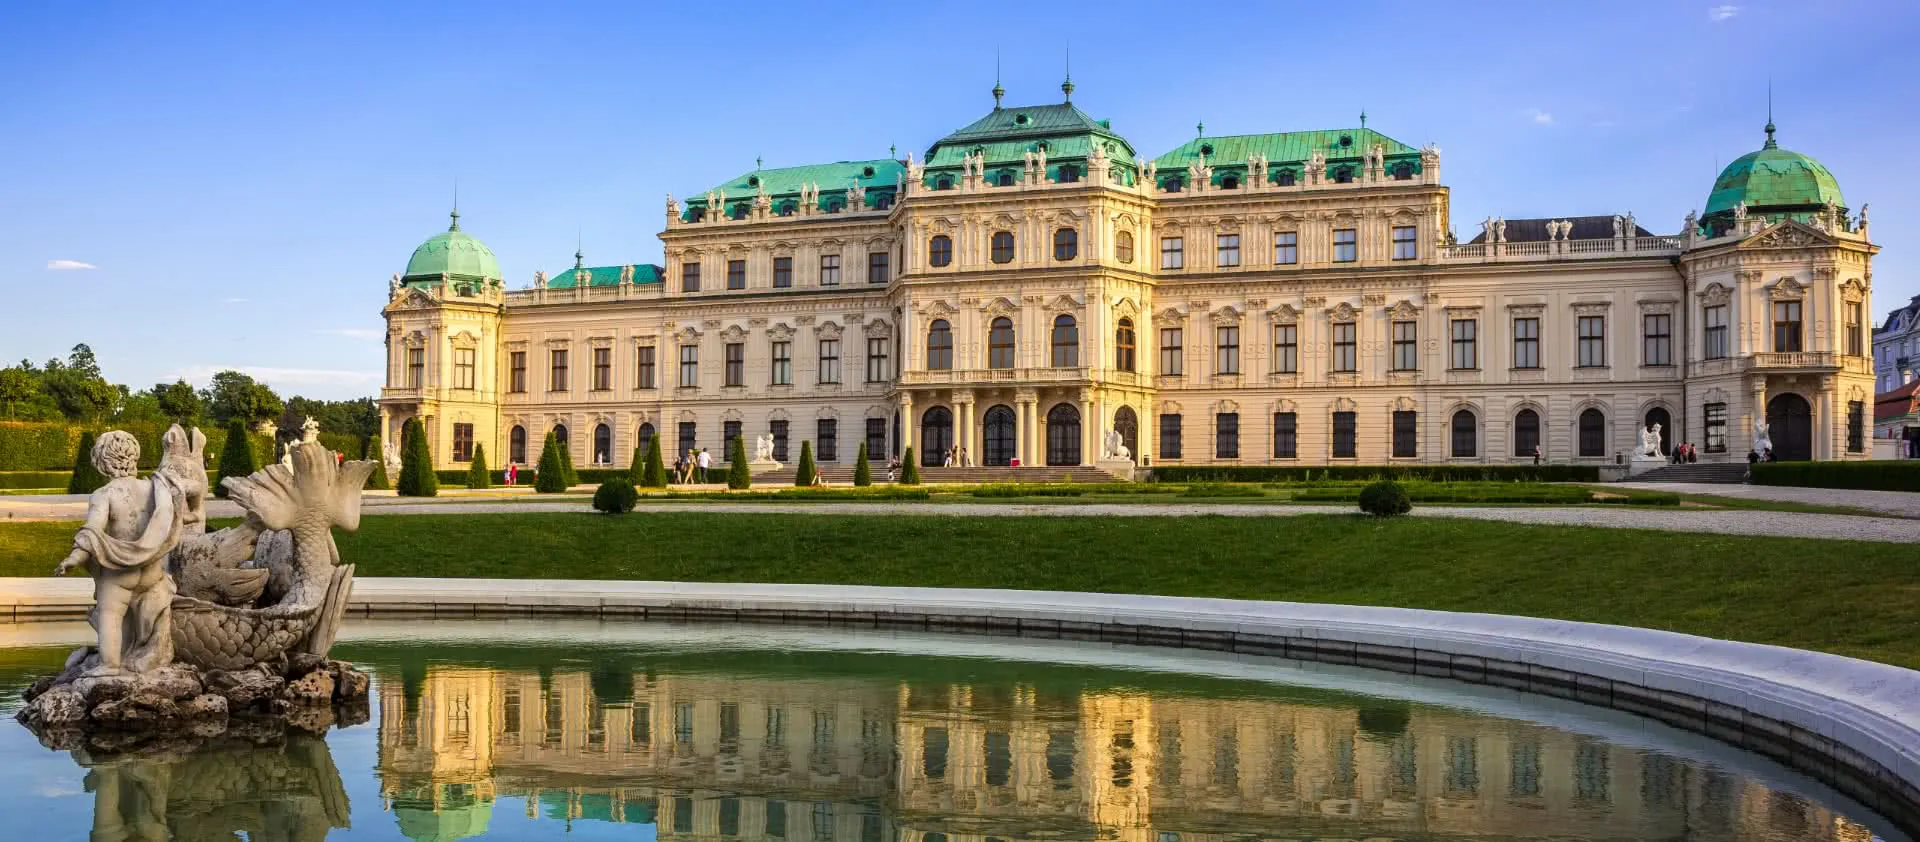 Vienna - the destination for workers